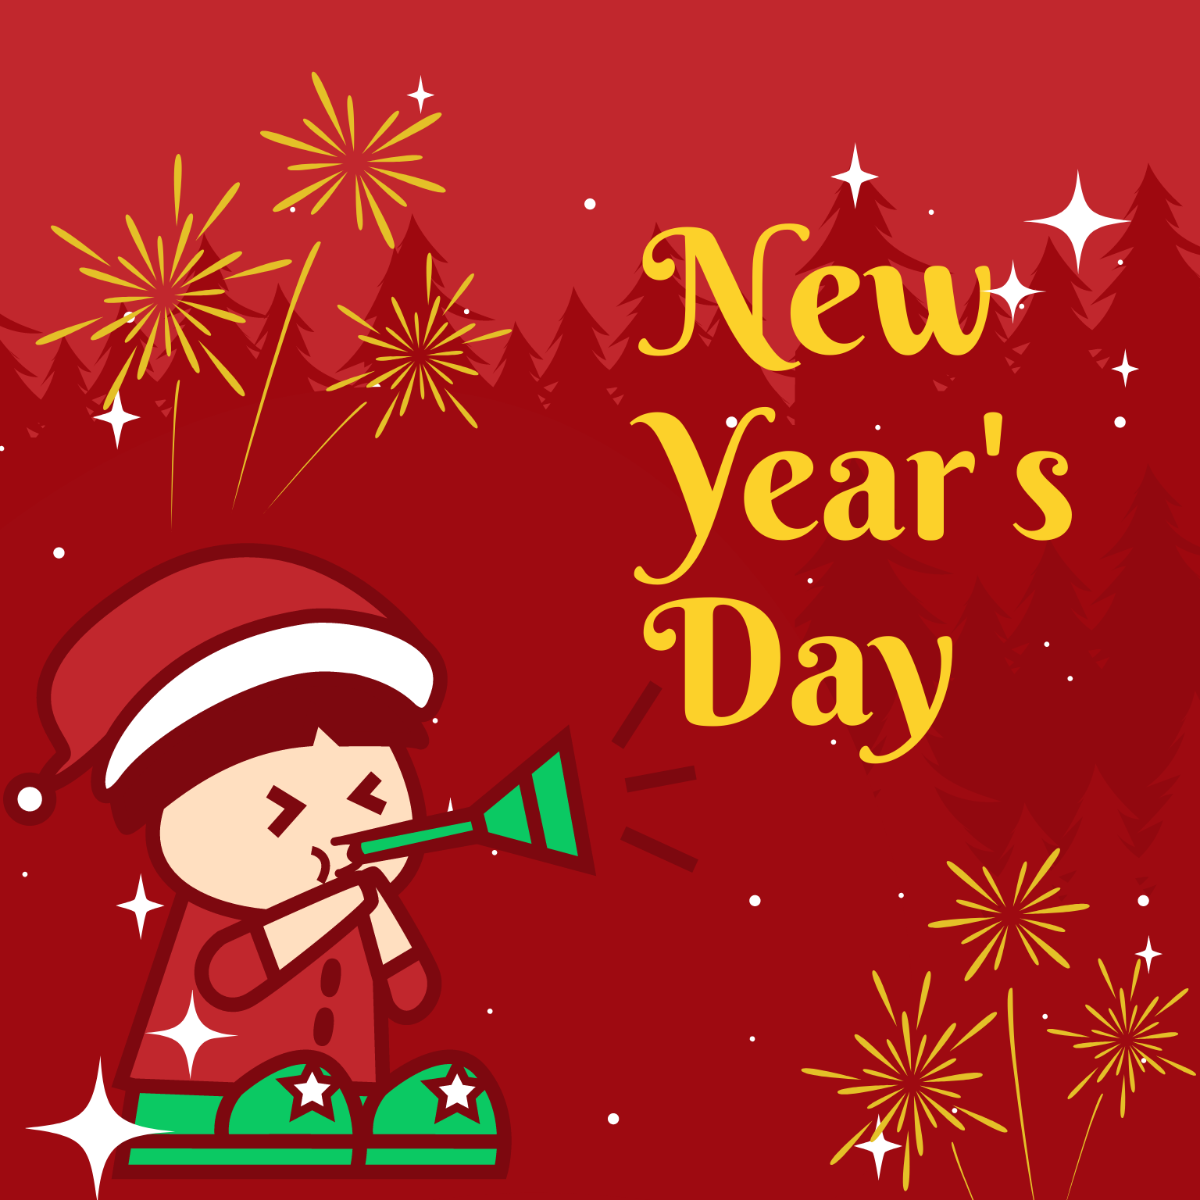 New Year's Day Cartoon Vector Template